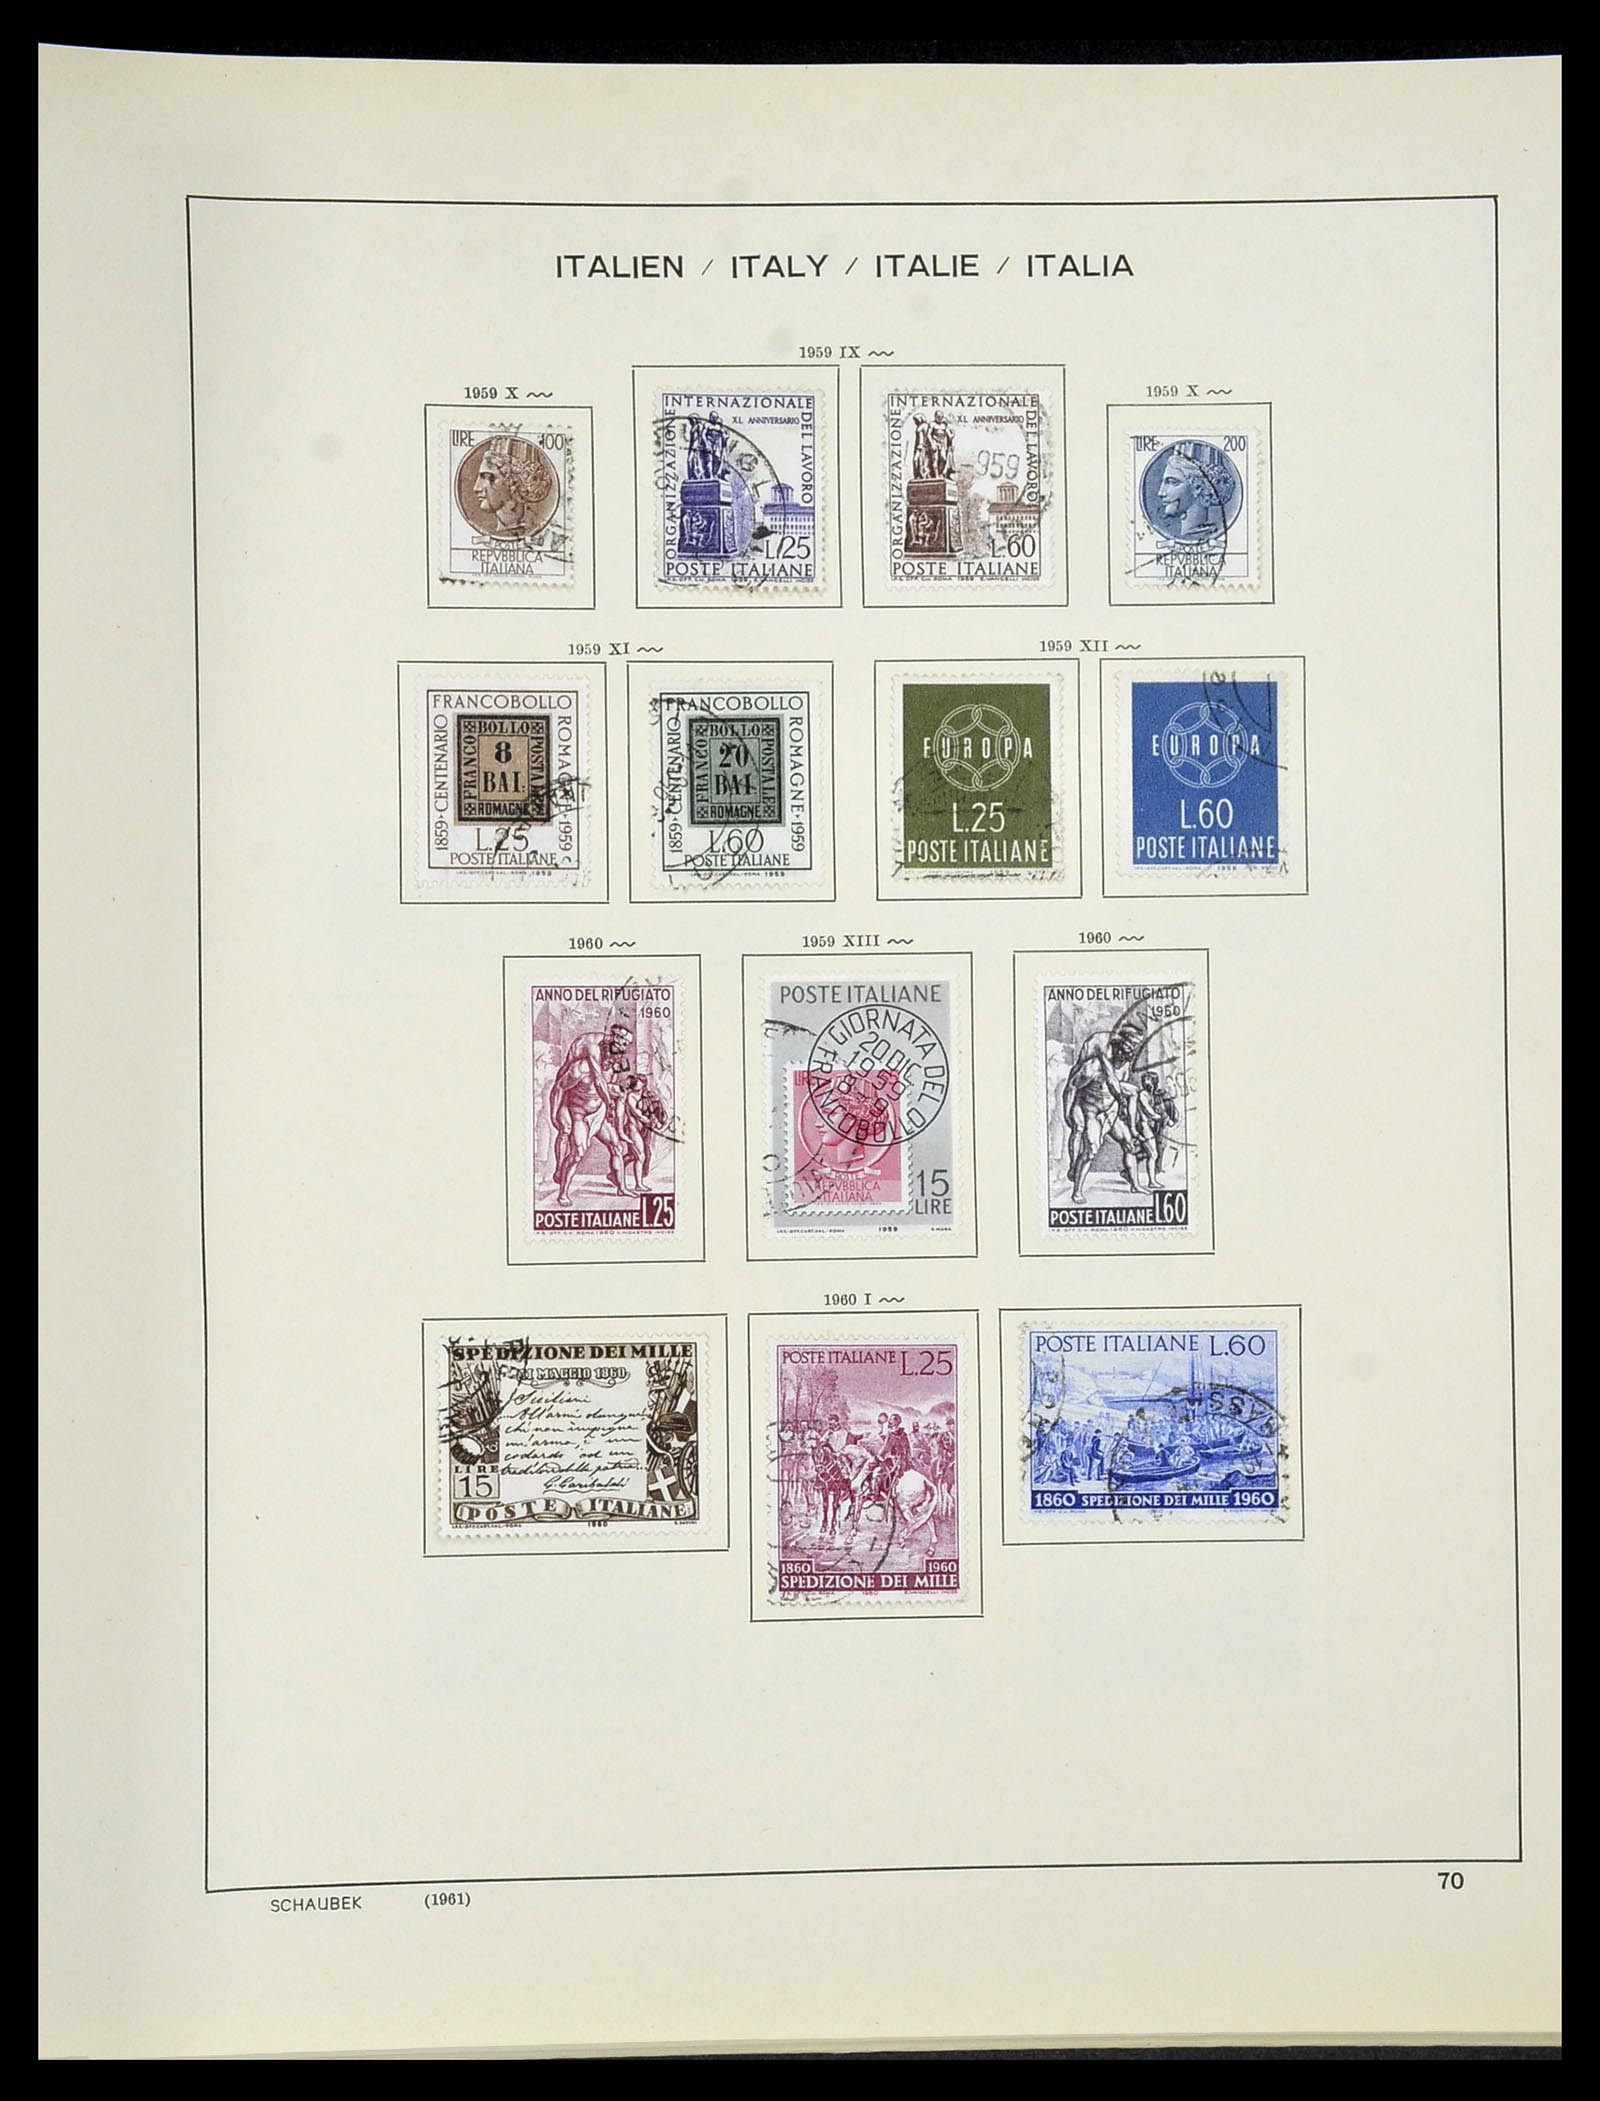 34420 071 - Stamp Collection 34420 Italy 1863-2001.